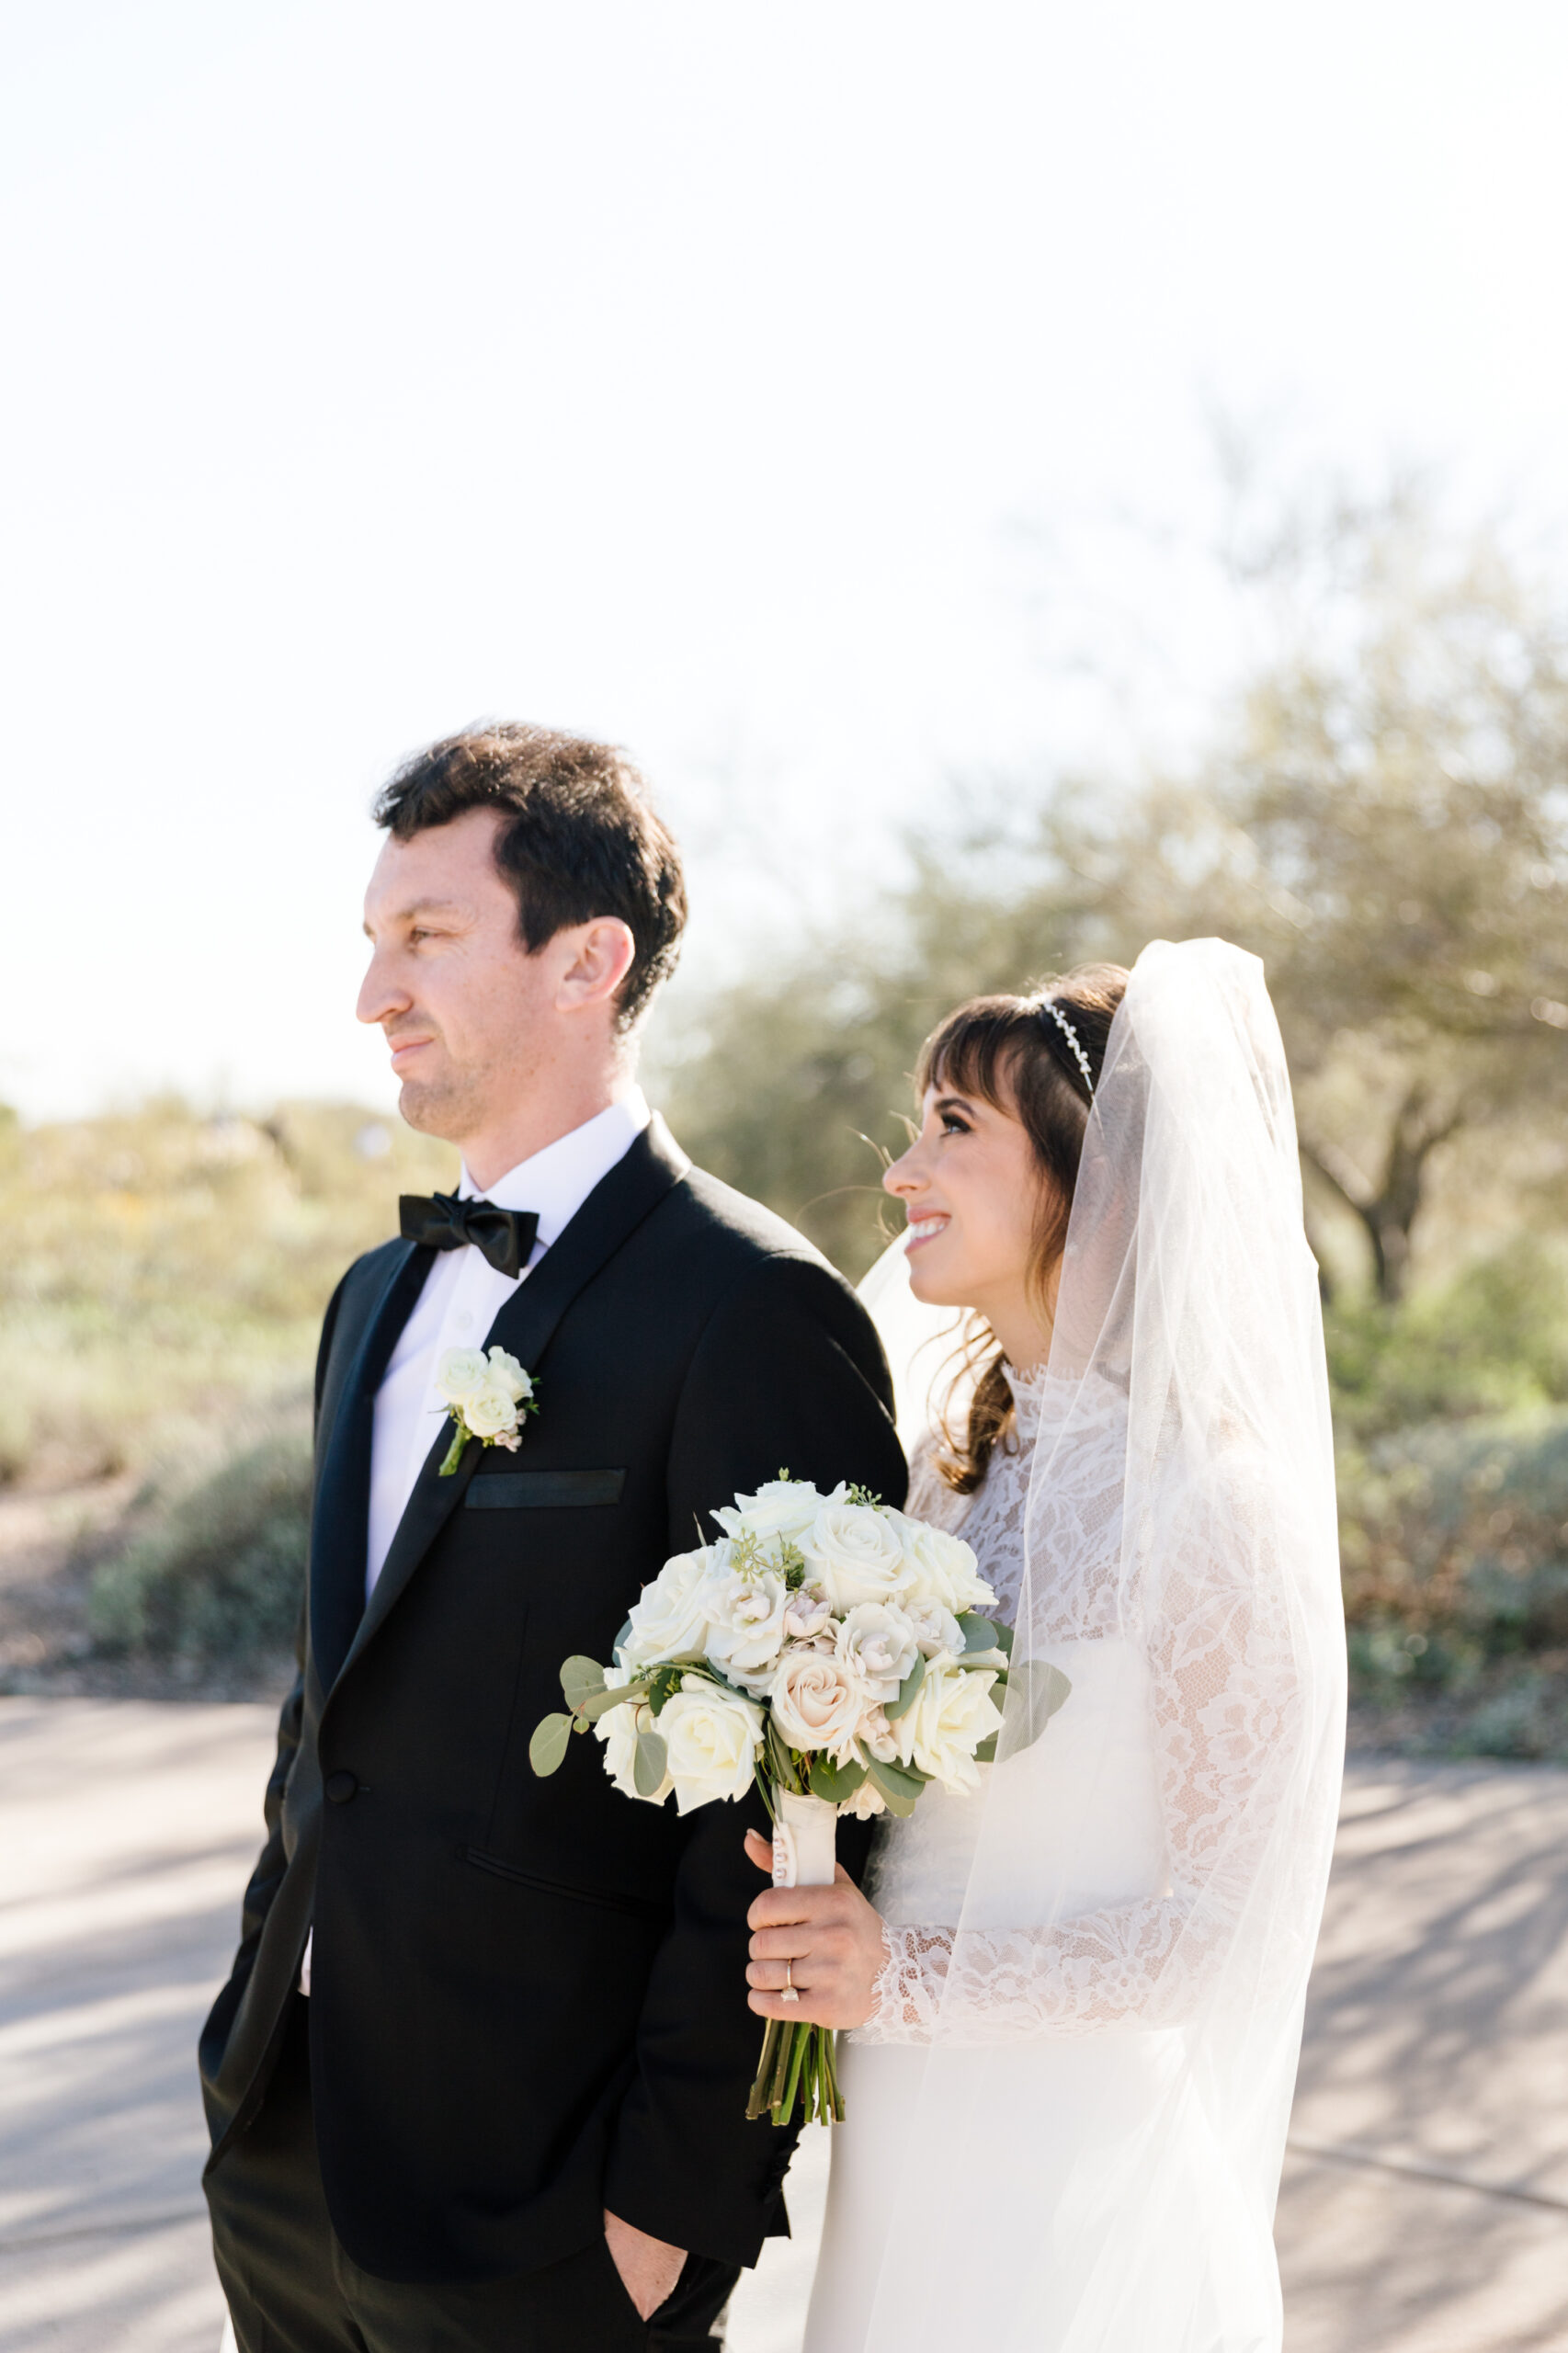 This Anthem Golf & Country Club wedding in Arizona embodied the essence of family, elegance & pure bliss. Check out the Anthem Golf & Country Club venue!